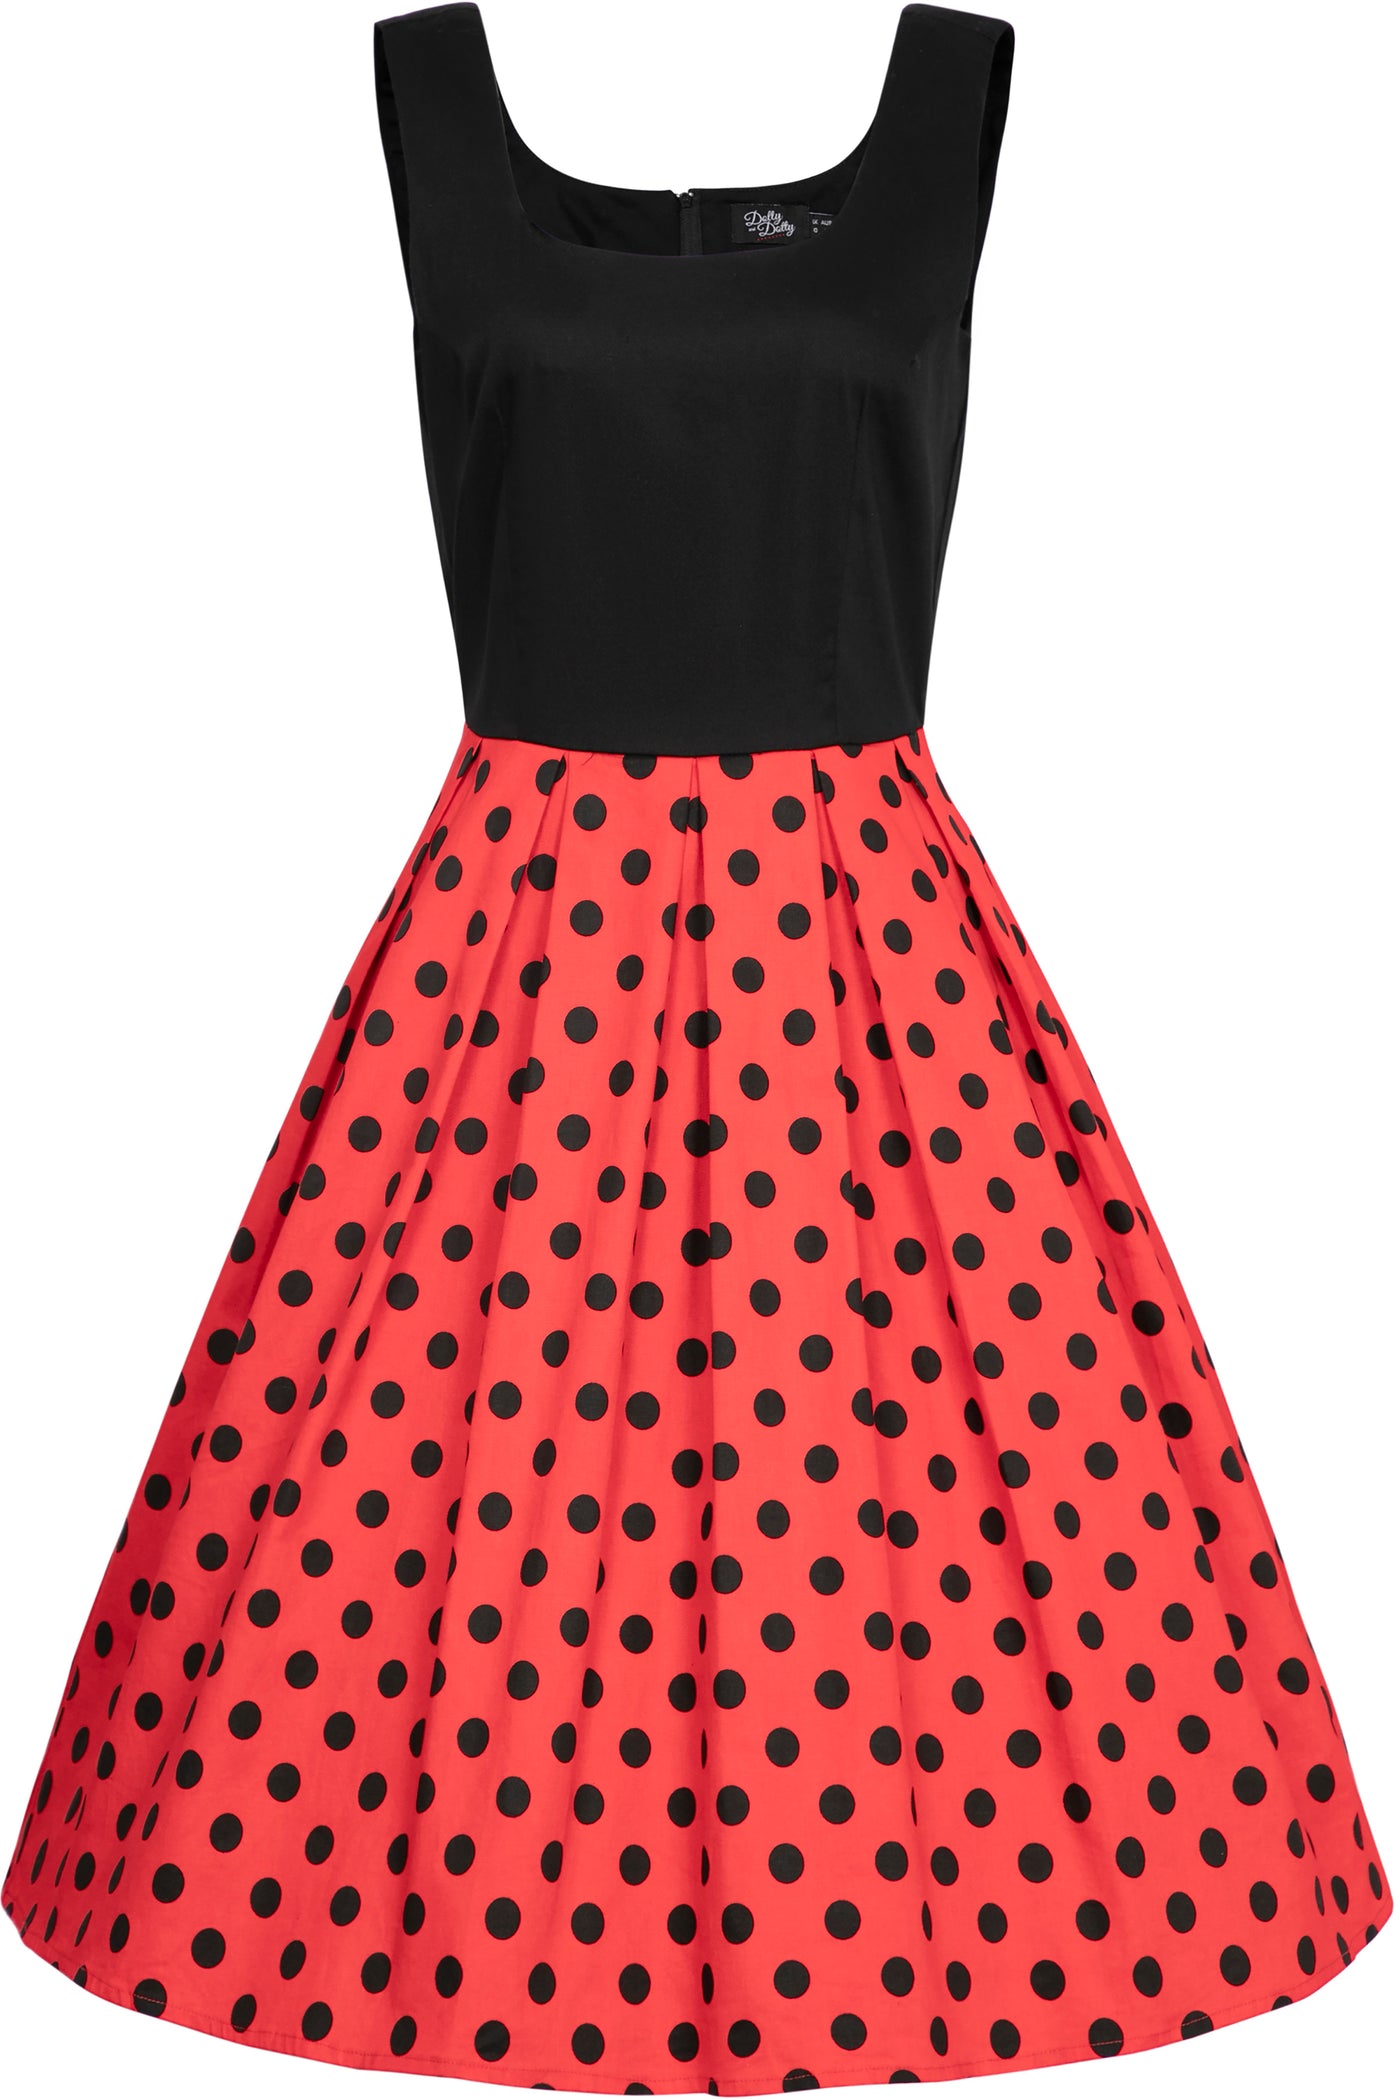 Sleeveless Amanda dress, with black top and red skirt, with black polka dot spots, front view